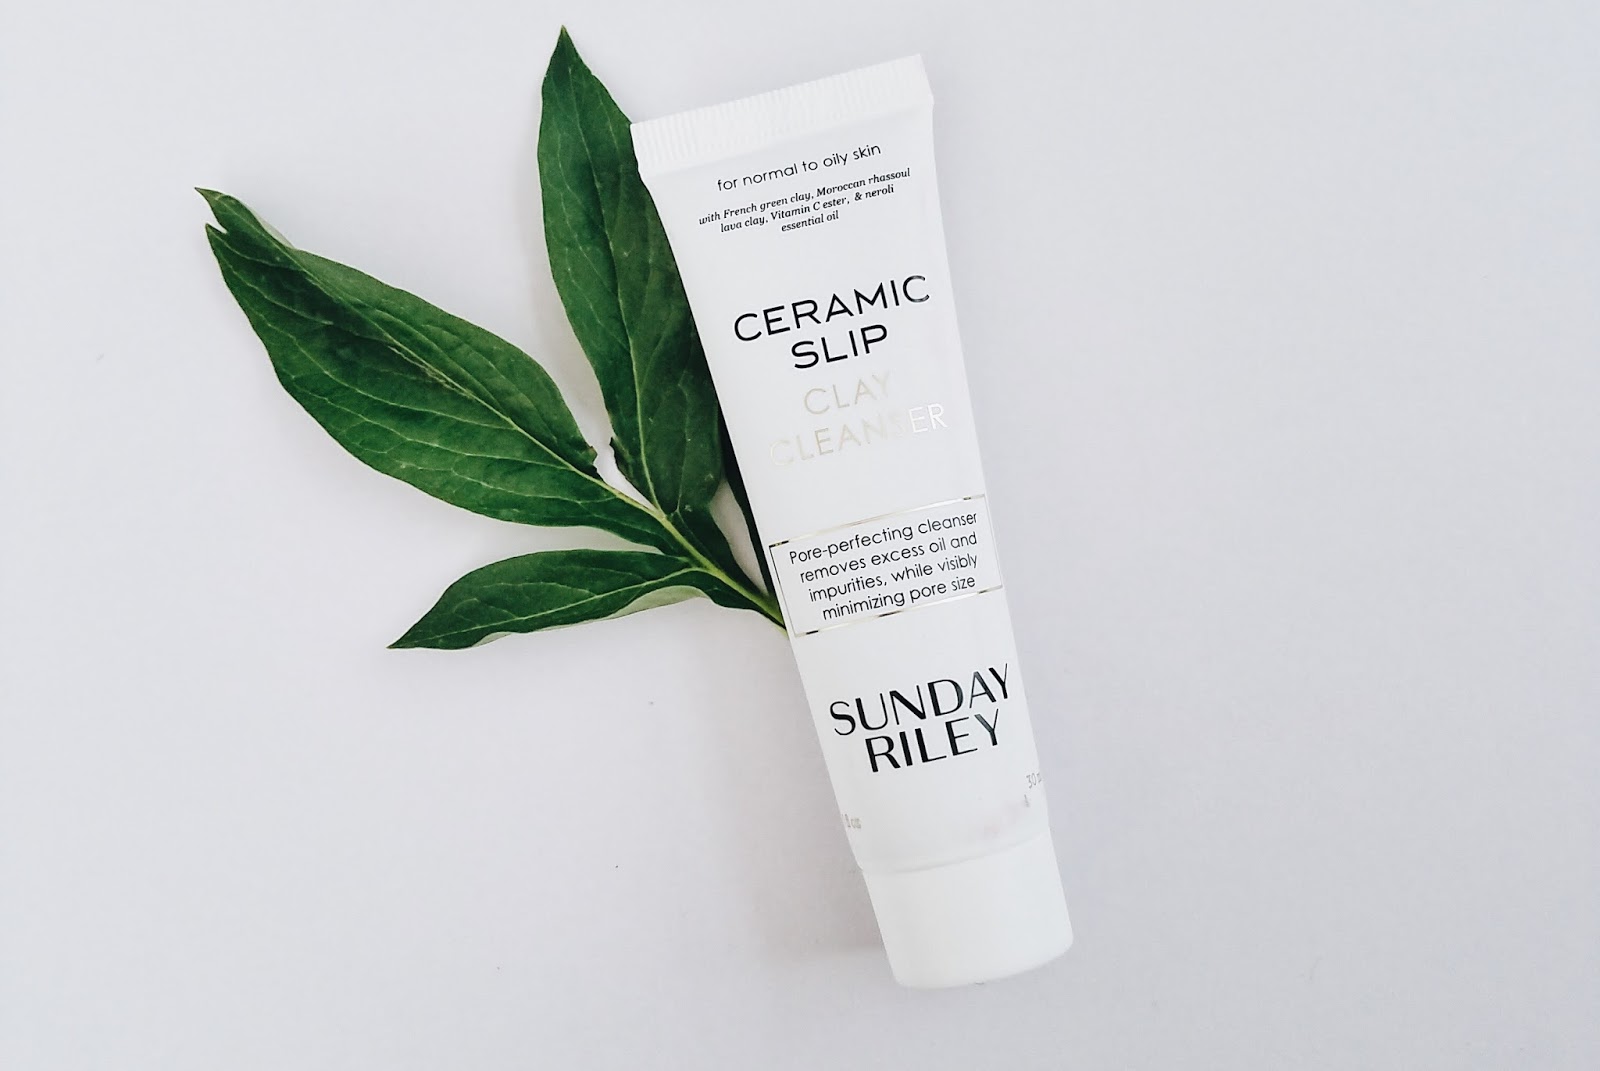 Sunday Riley Ceramic Clay Slip Cleanser: Review by The Jen Project. Low foaming, gentle cleansing, neutral scent, great for rinsing away residue left by oil cleanser.